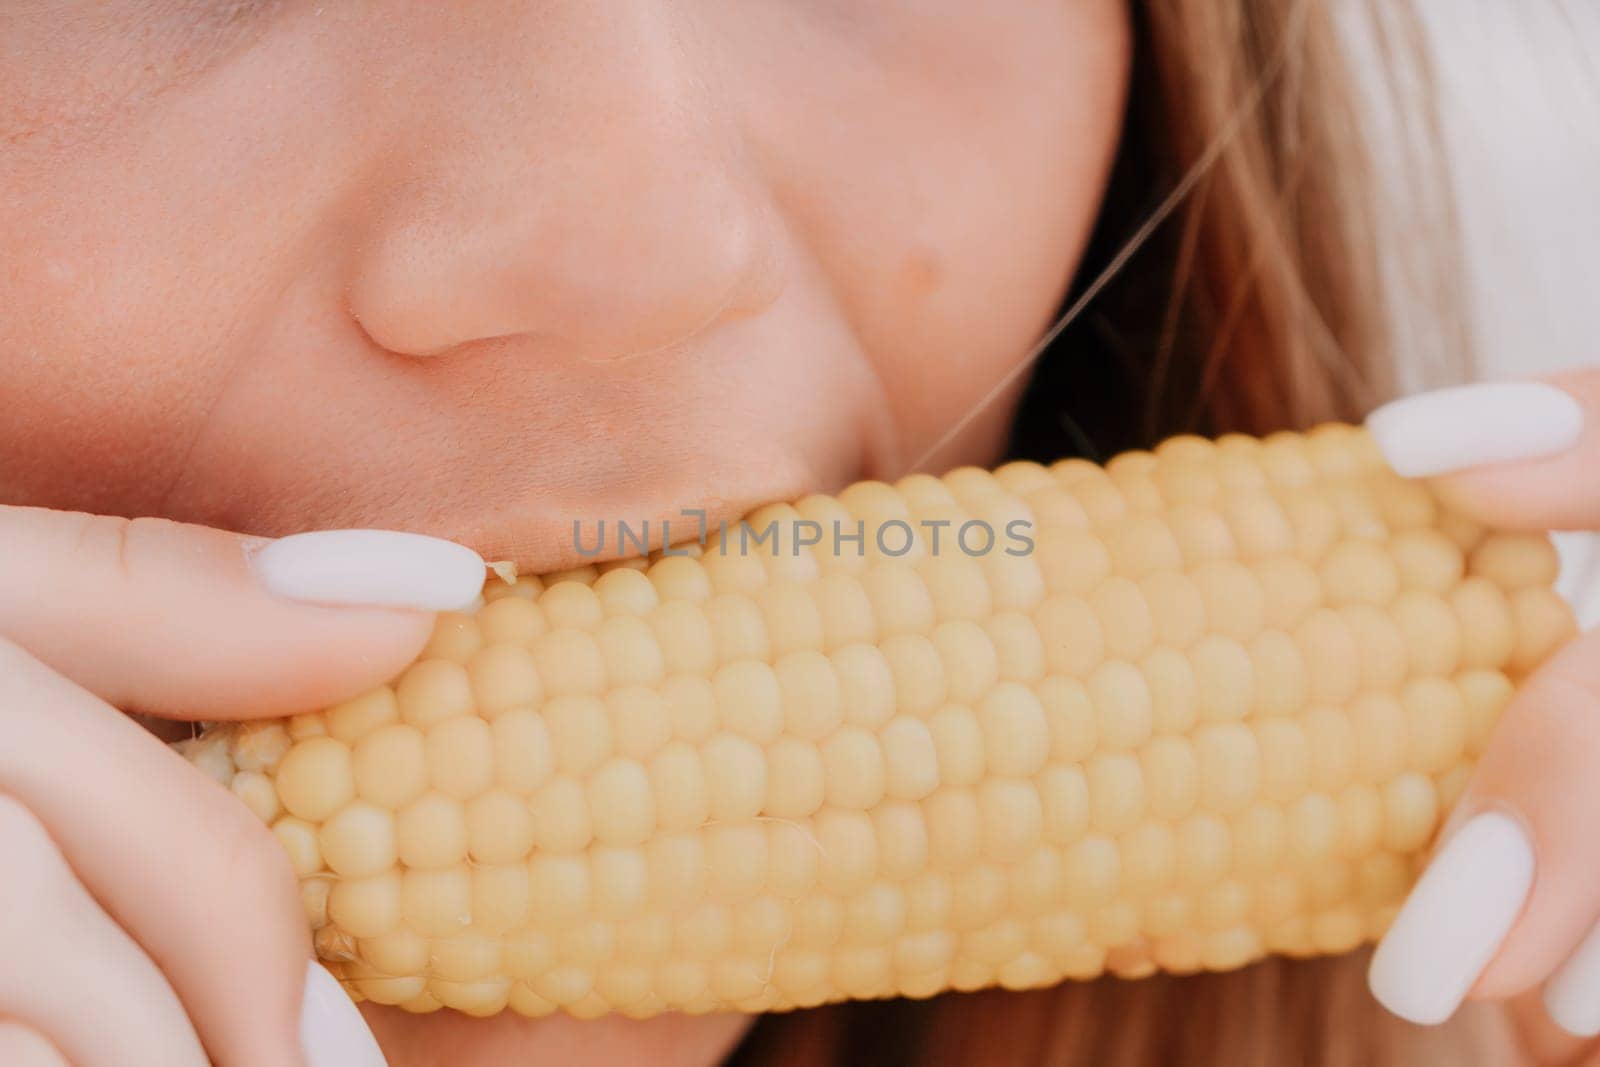 Woman eats corn on beach. Woman's hands hold delicious juicy grilled corn. A natural and healthy snack at the beach. Close-up. by panophotograph